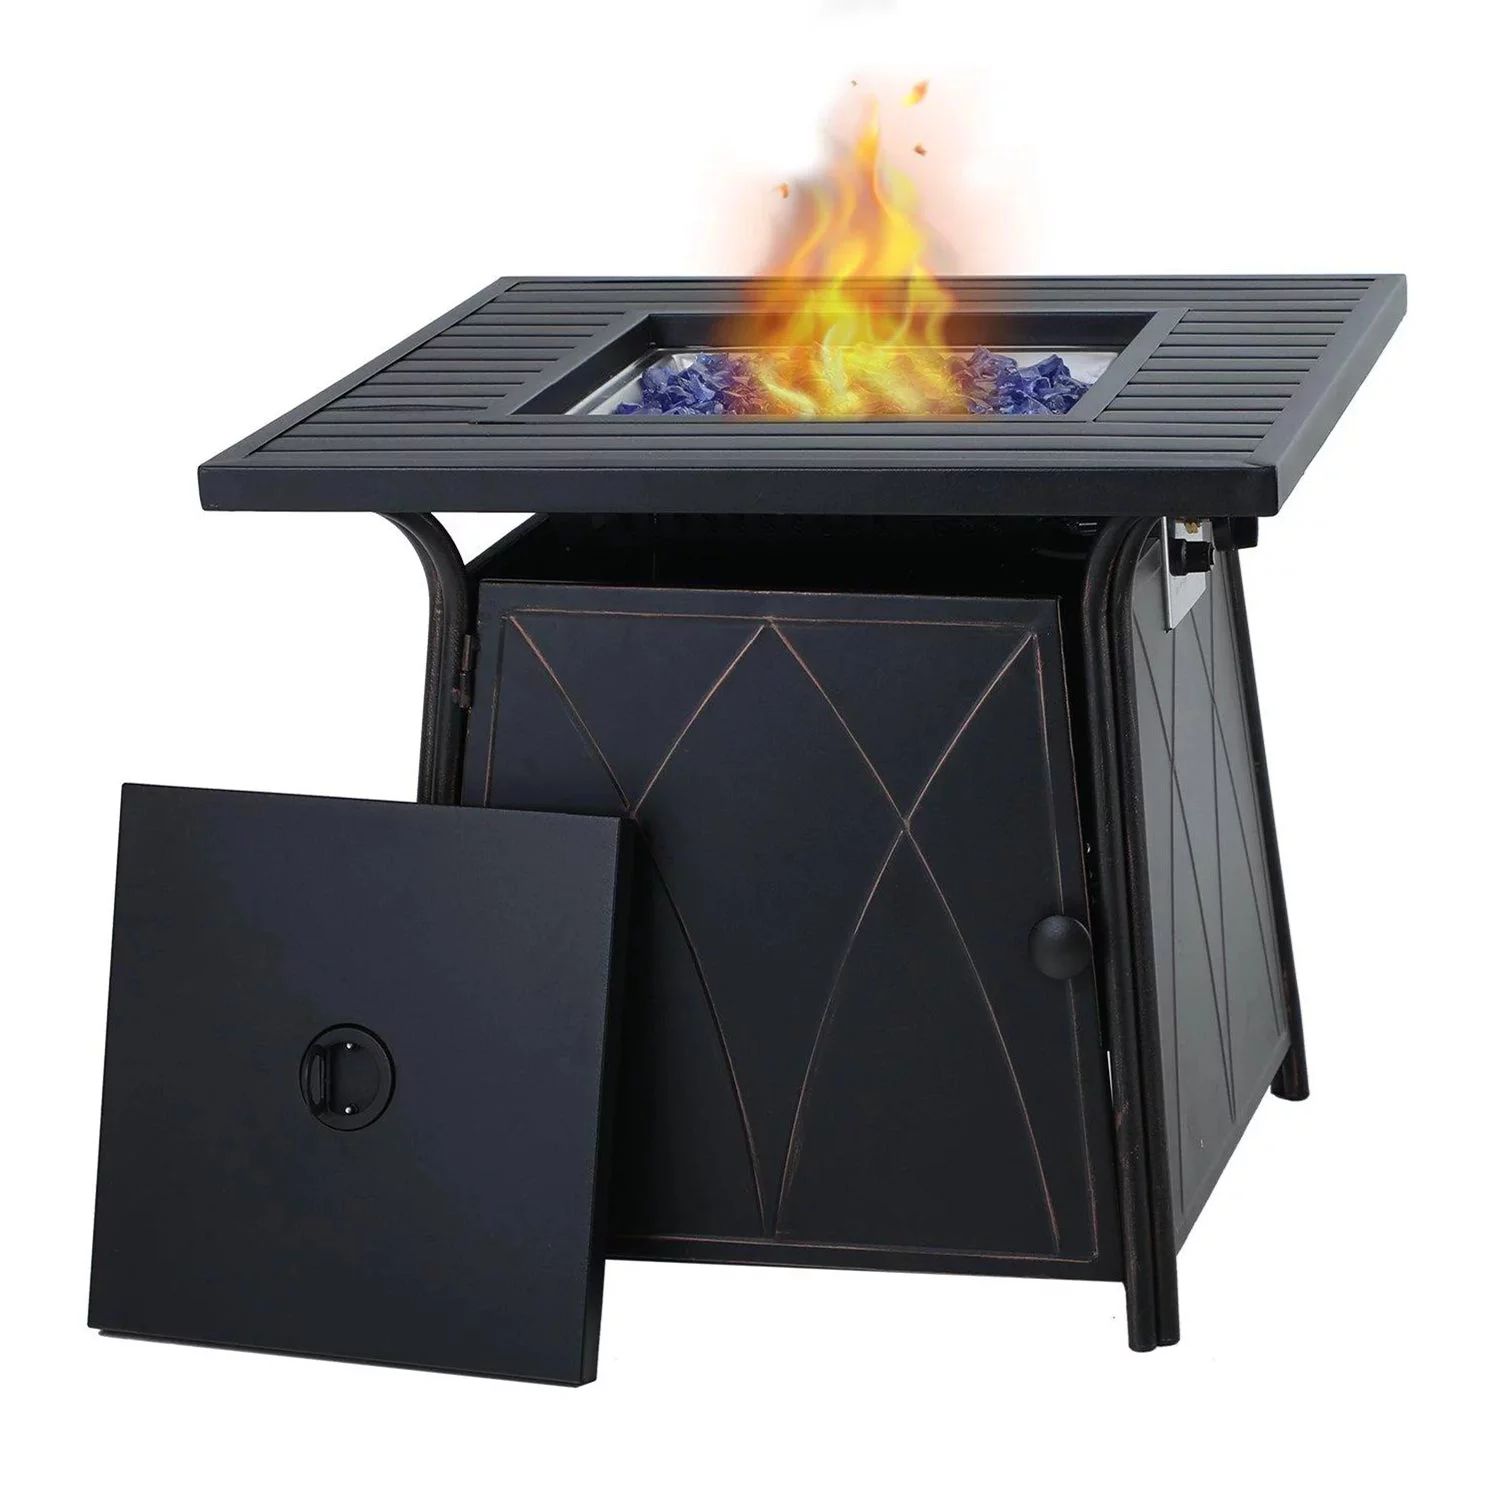 Sophia & William 28 inch Outdoor Gas Fire Pit Table with Lid 50,000 BTU | Walmart (US)